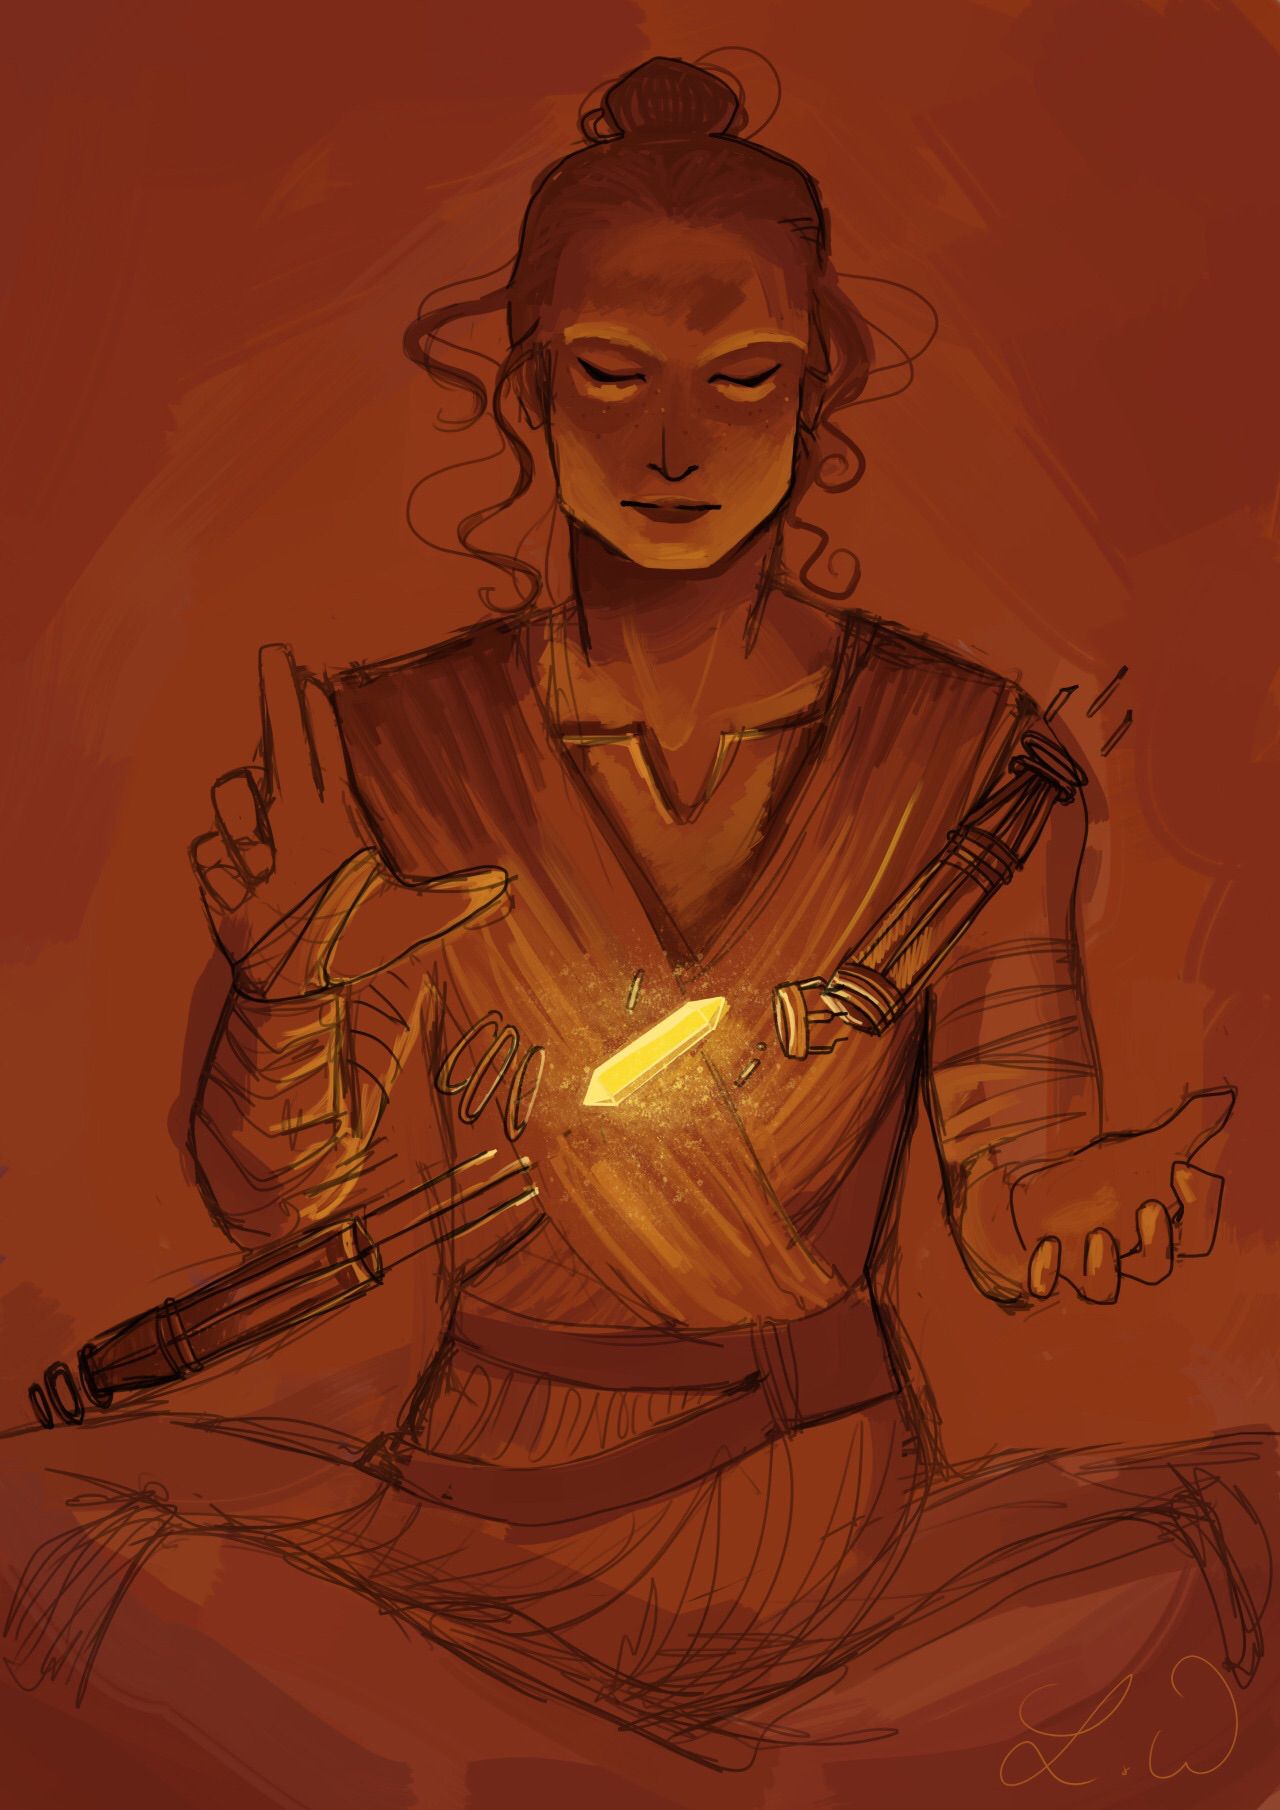 Rey, Constructing Her Double Bladed Lightsaber With The Traditional Yellow Crystal Of The Jedi Sentinel. “While. Rey Star Wars, Star Wars Image, Star Wars Rpg